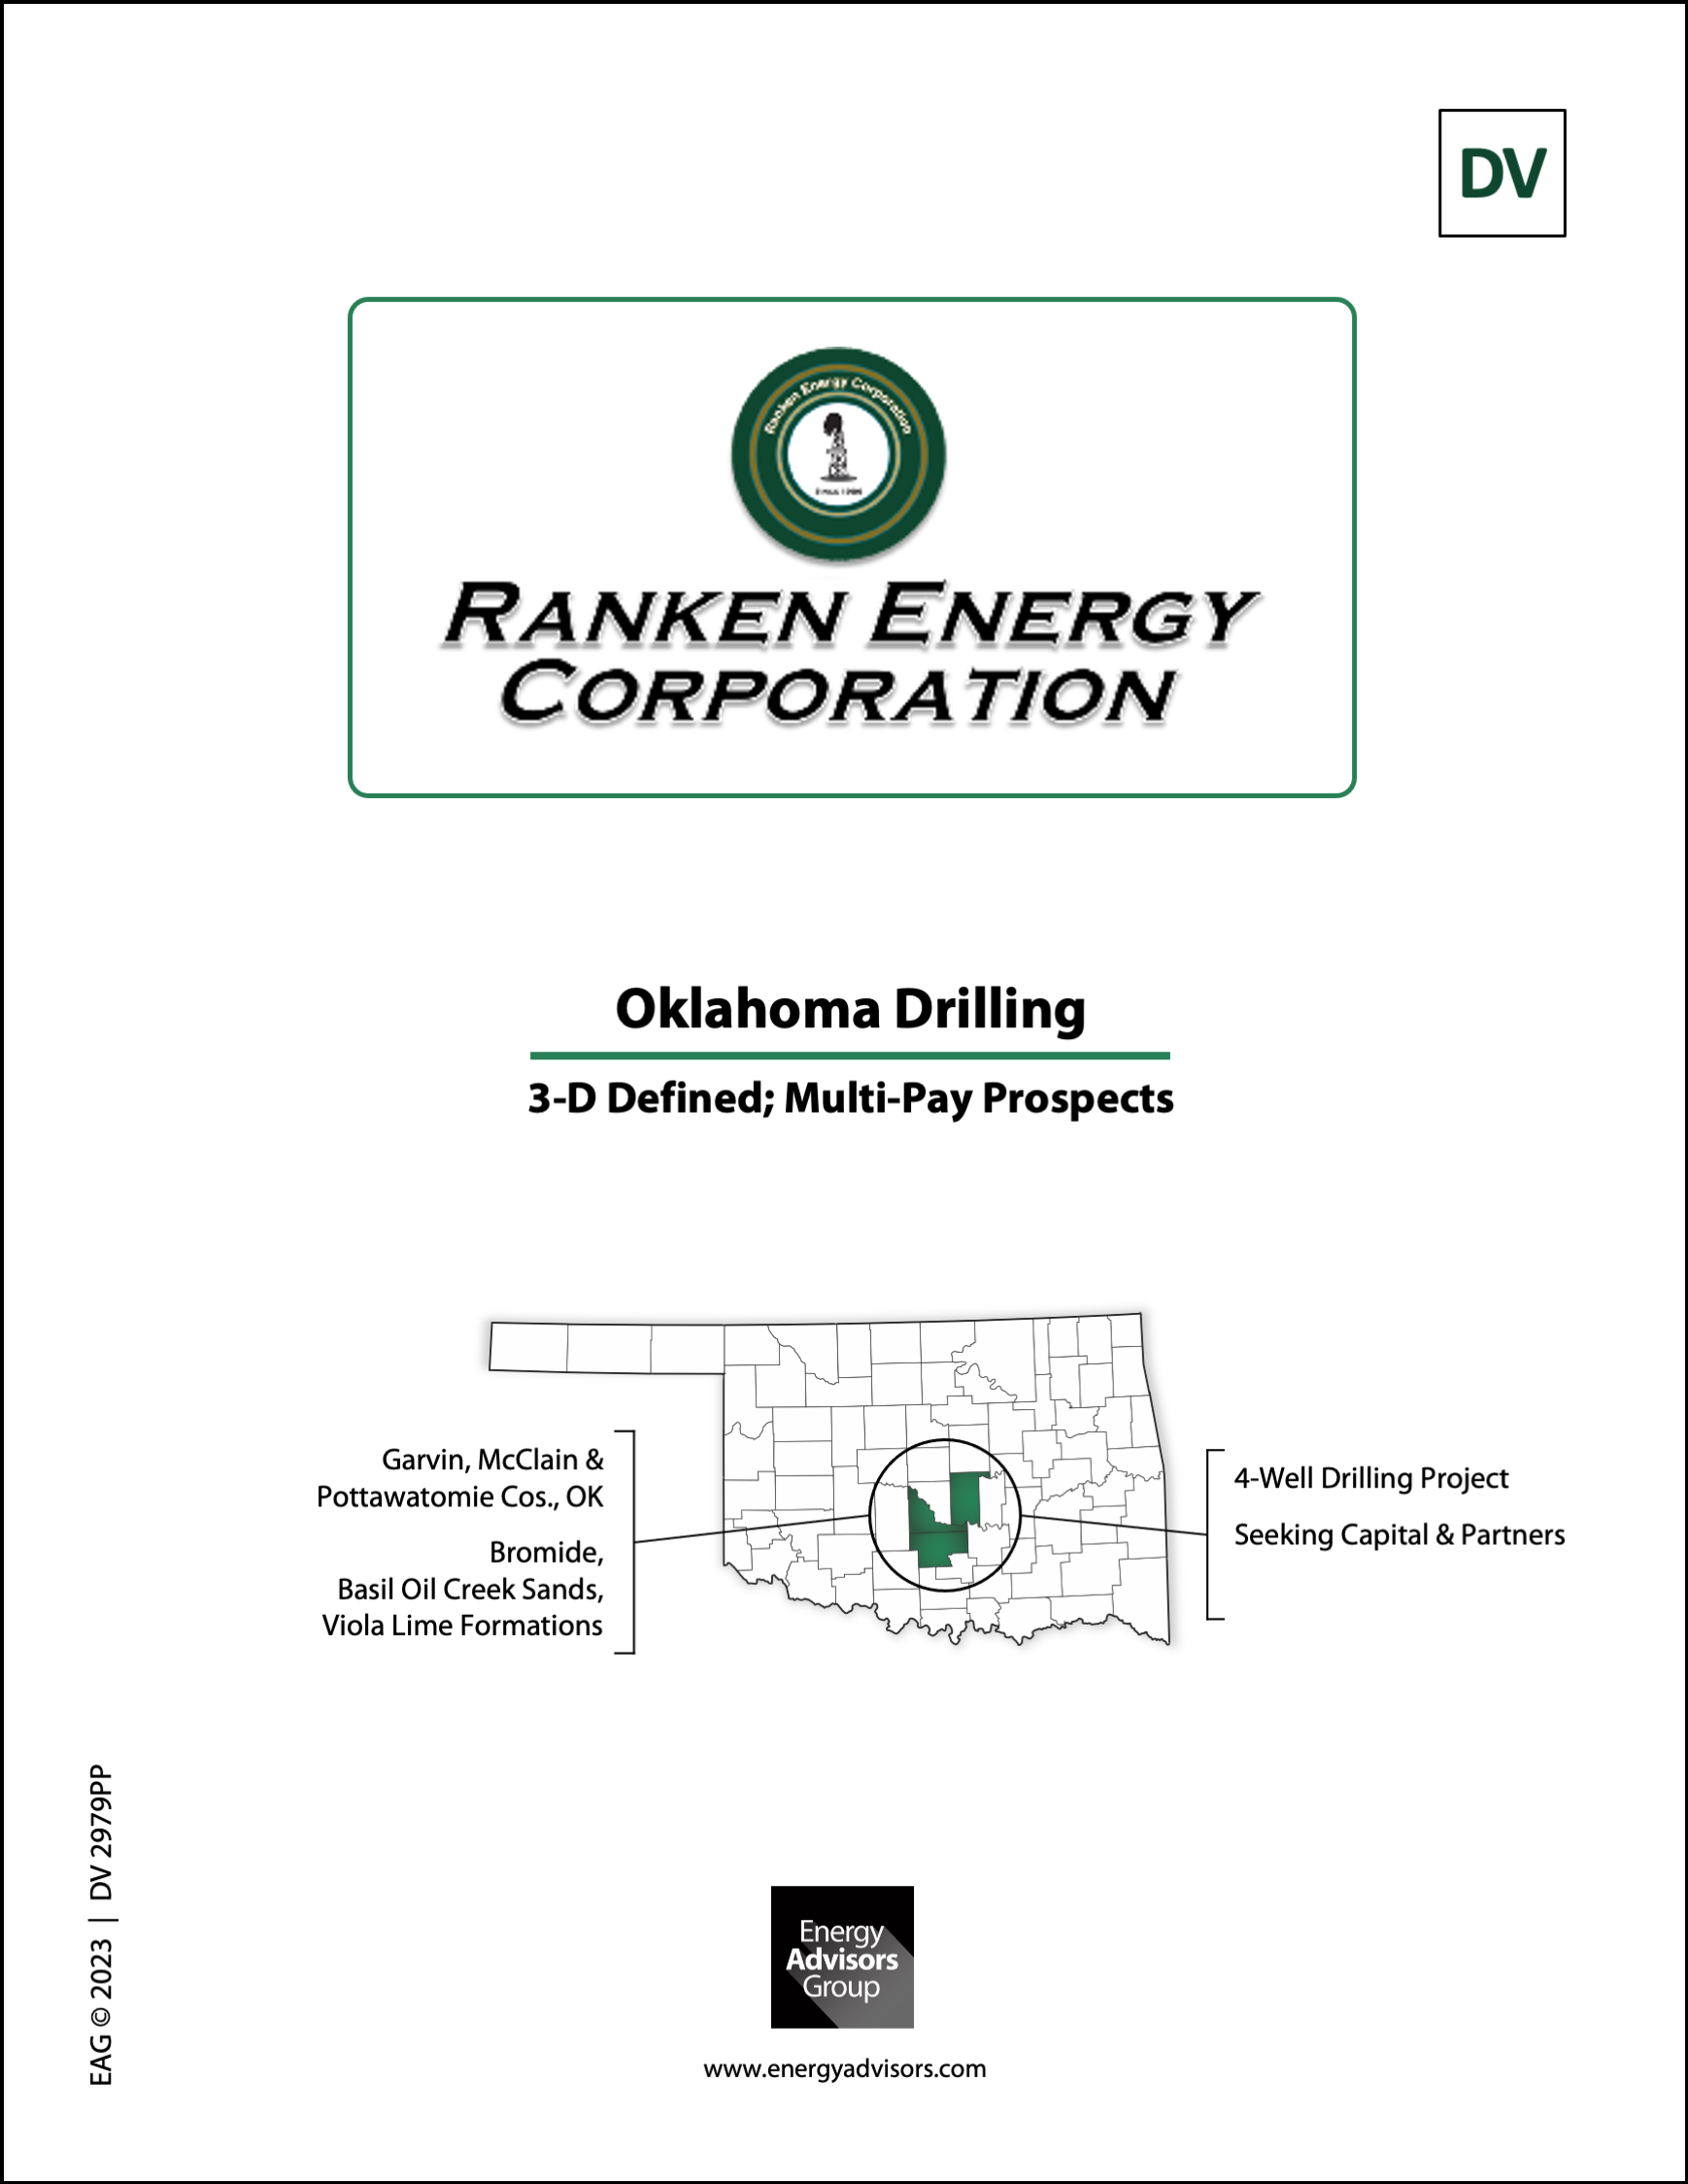 OKLAHOMA DRILLING PROJECTS